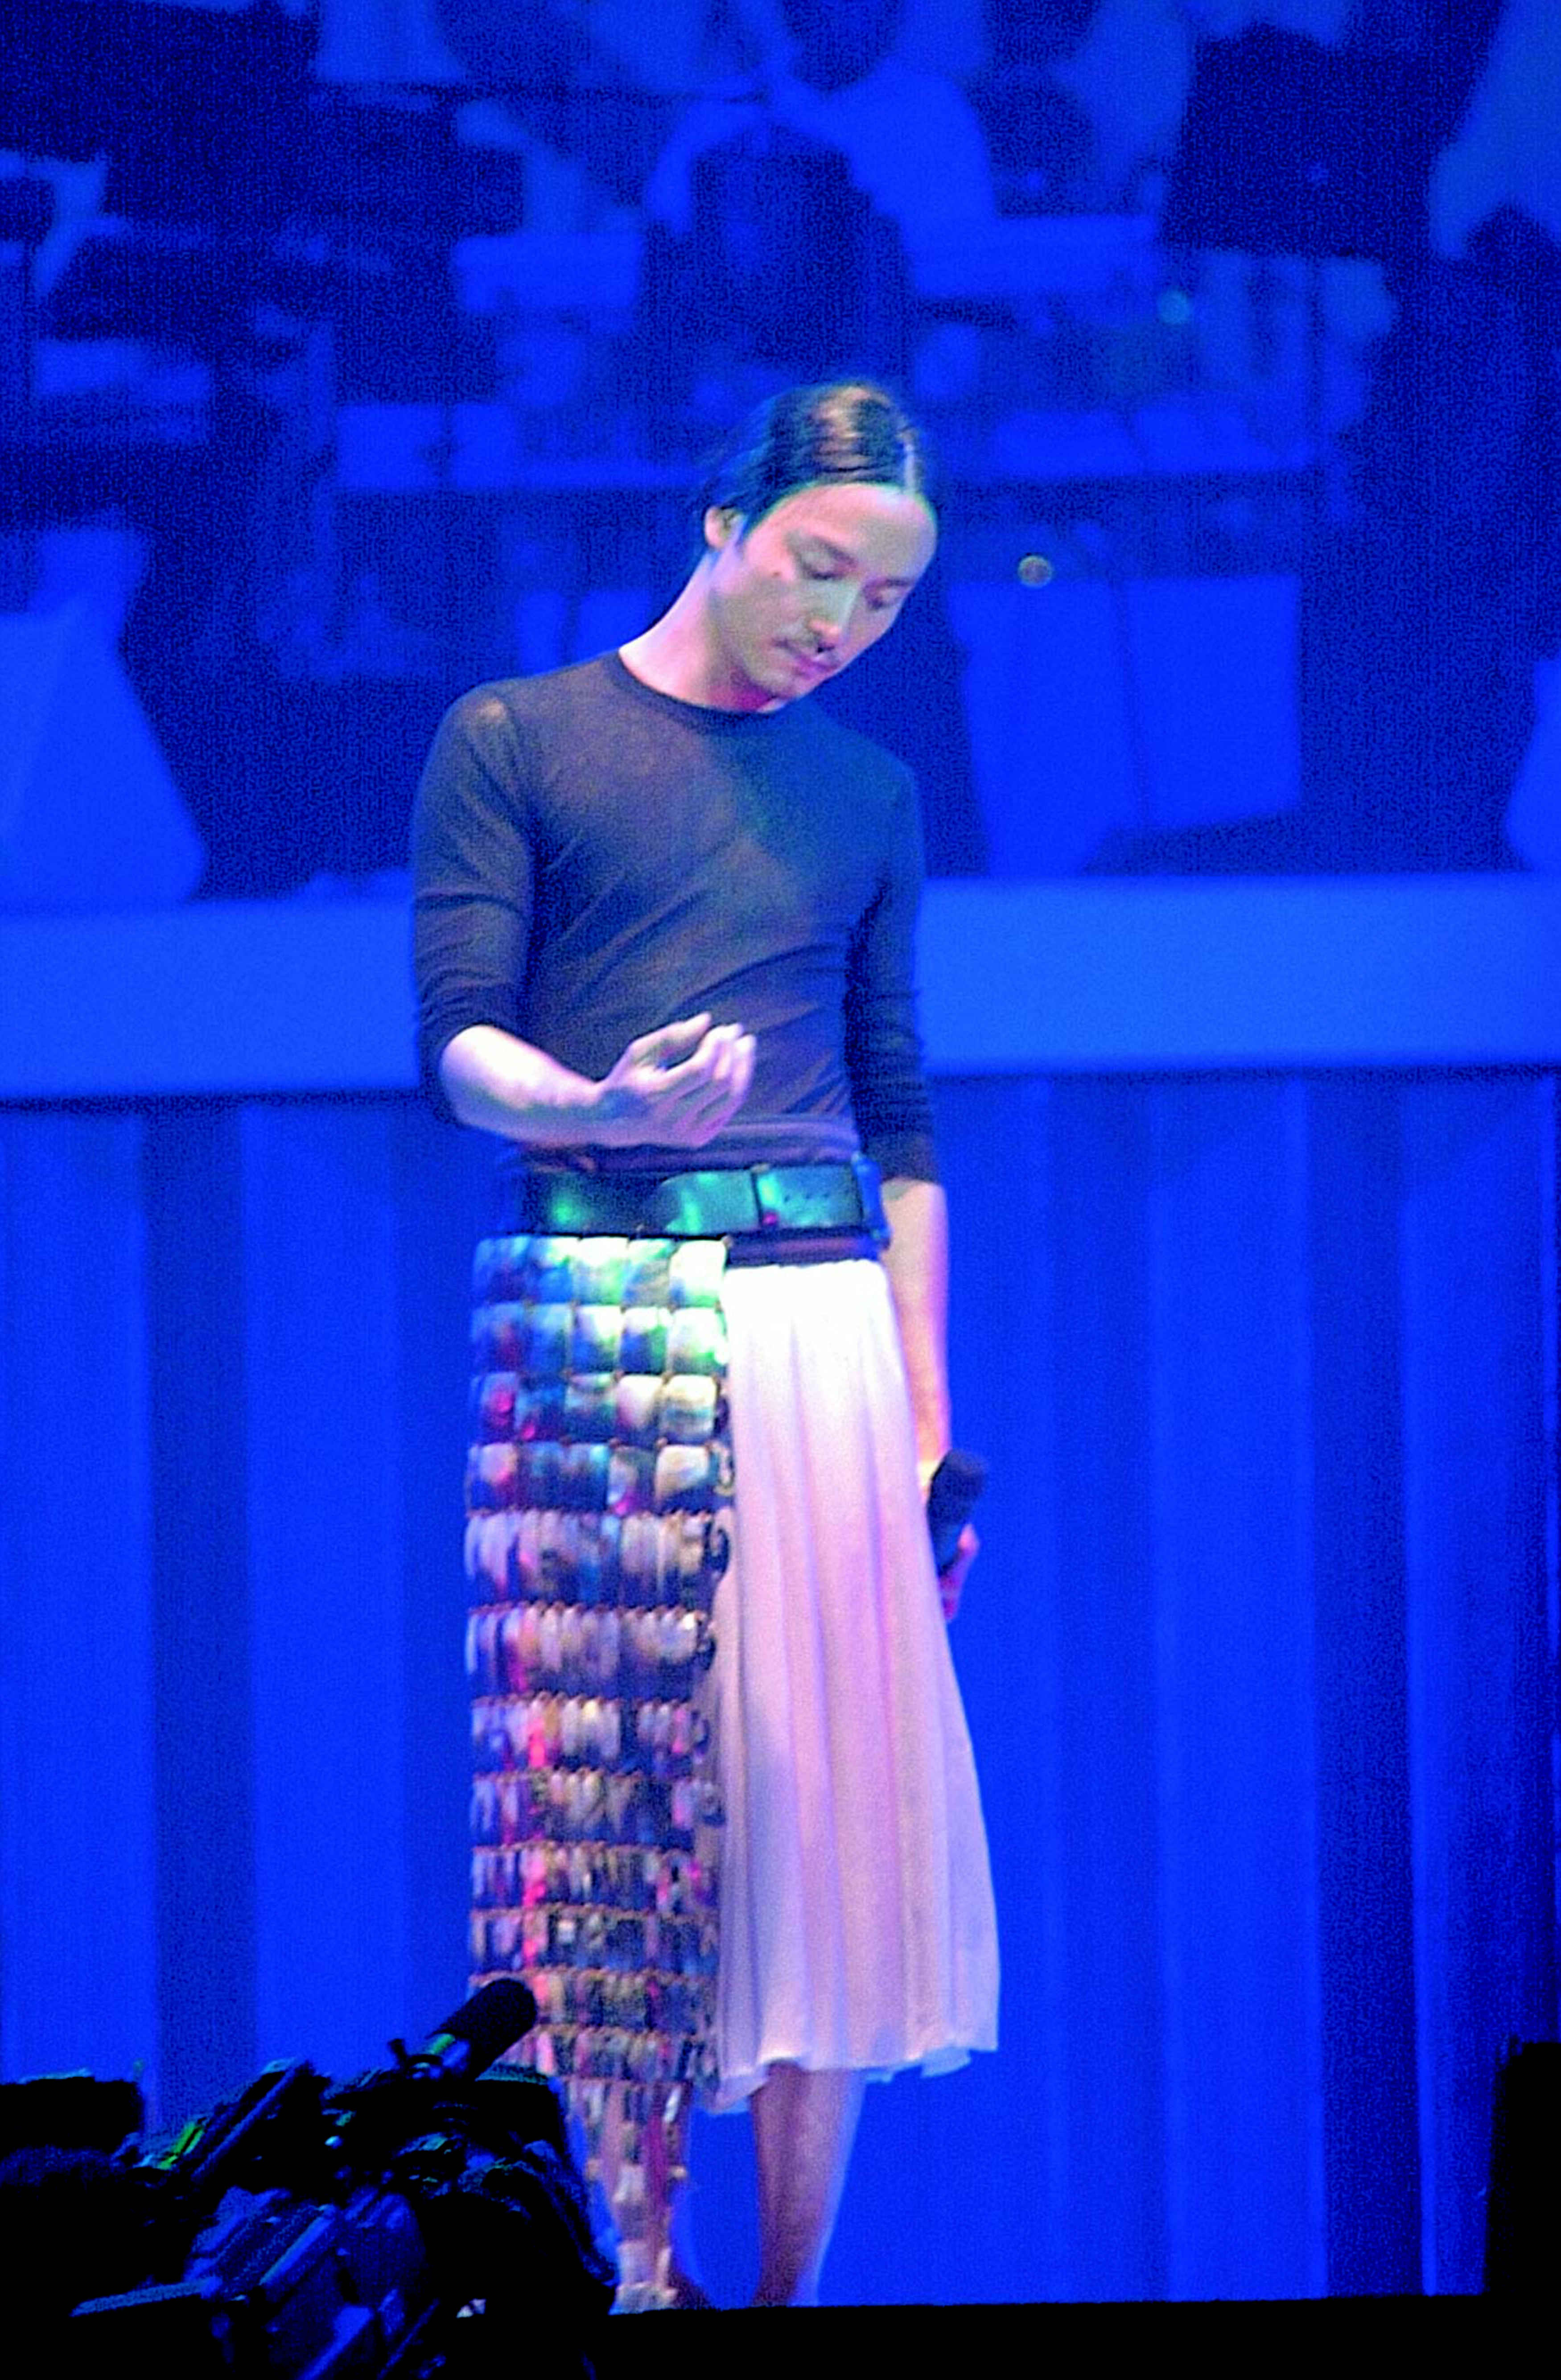 Meticulously crafted seashell culottes worn by Leslie Cheung during his Passion Tour concert, designed for him by a famous French designer.